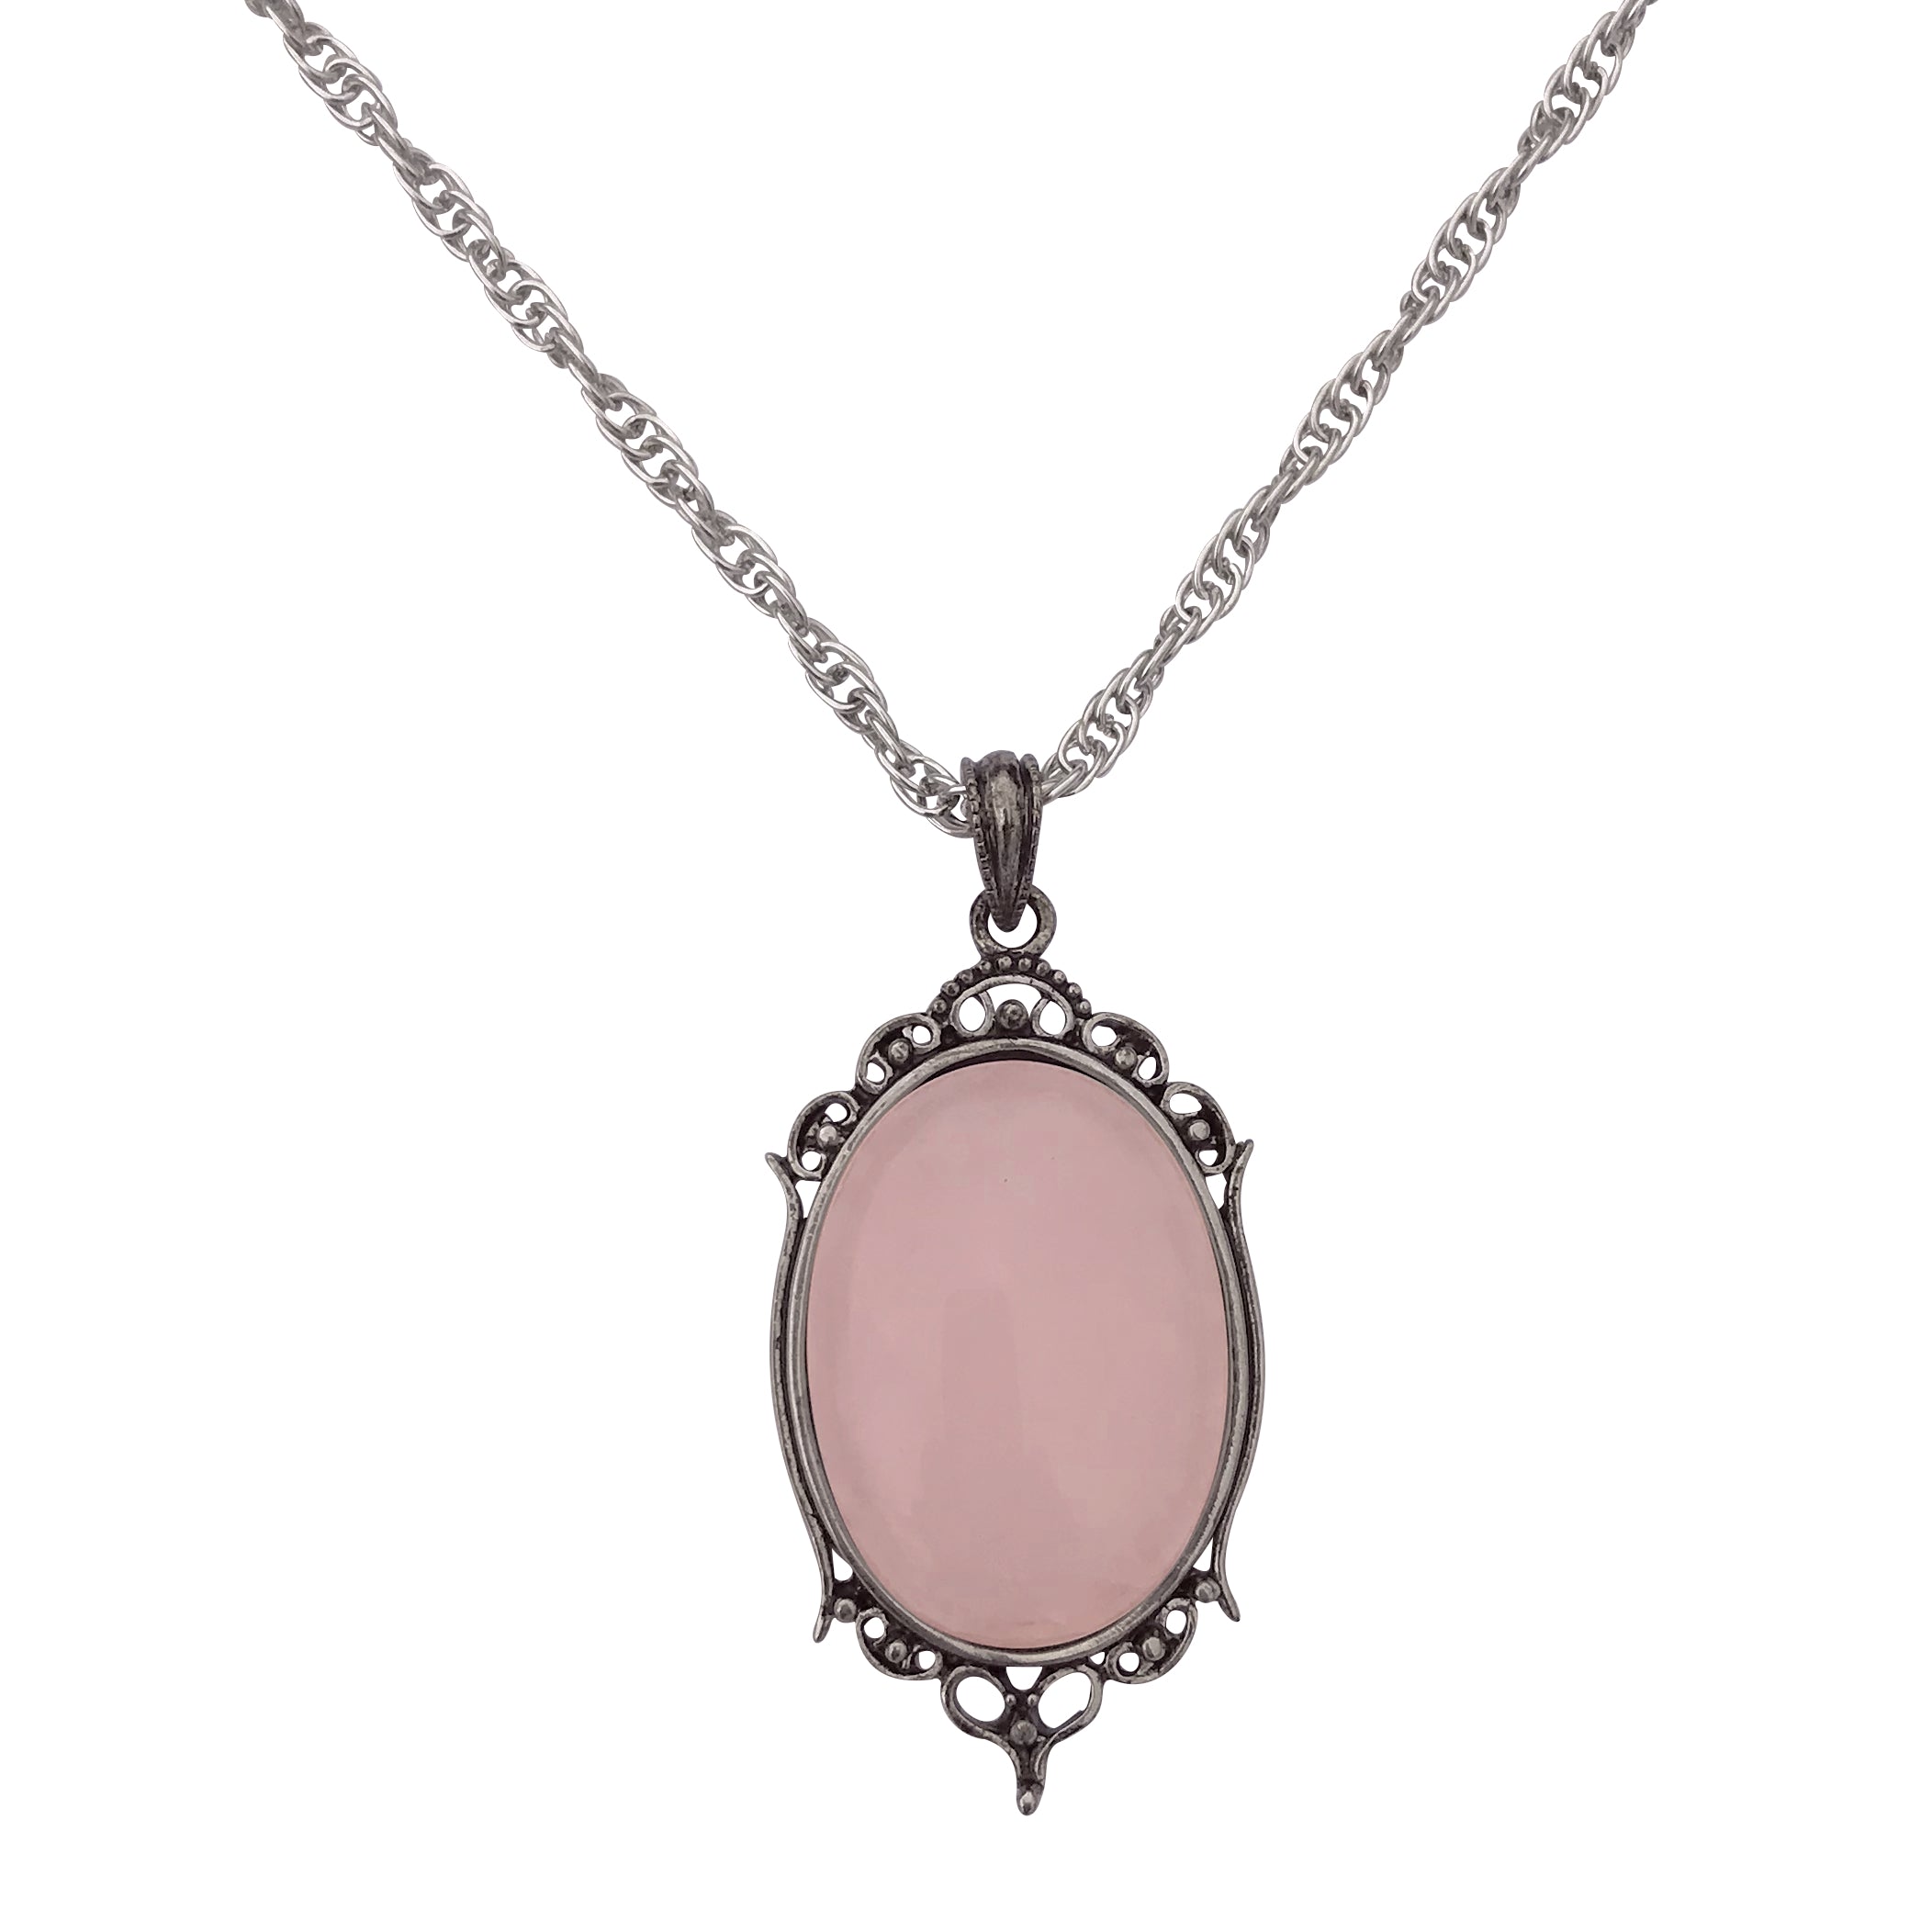 Echmeck Handmade Sterling Silver 925 Natural Oval Pink Rose Quartz 15x20mm  Stone Small Pendant Necklace 16+2 inches Chain